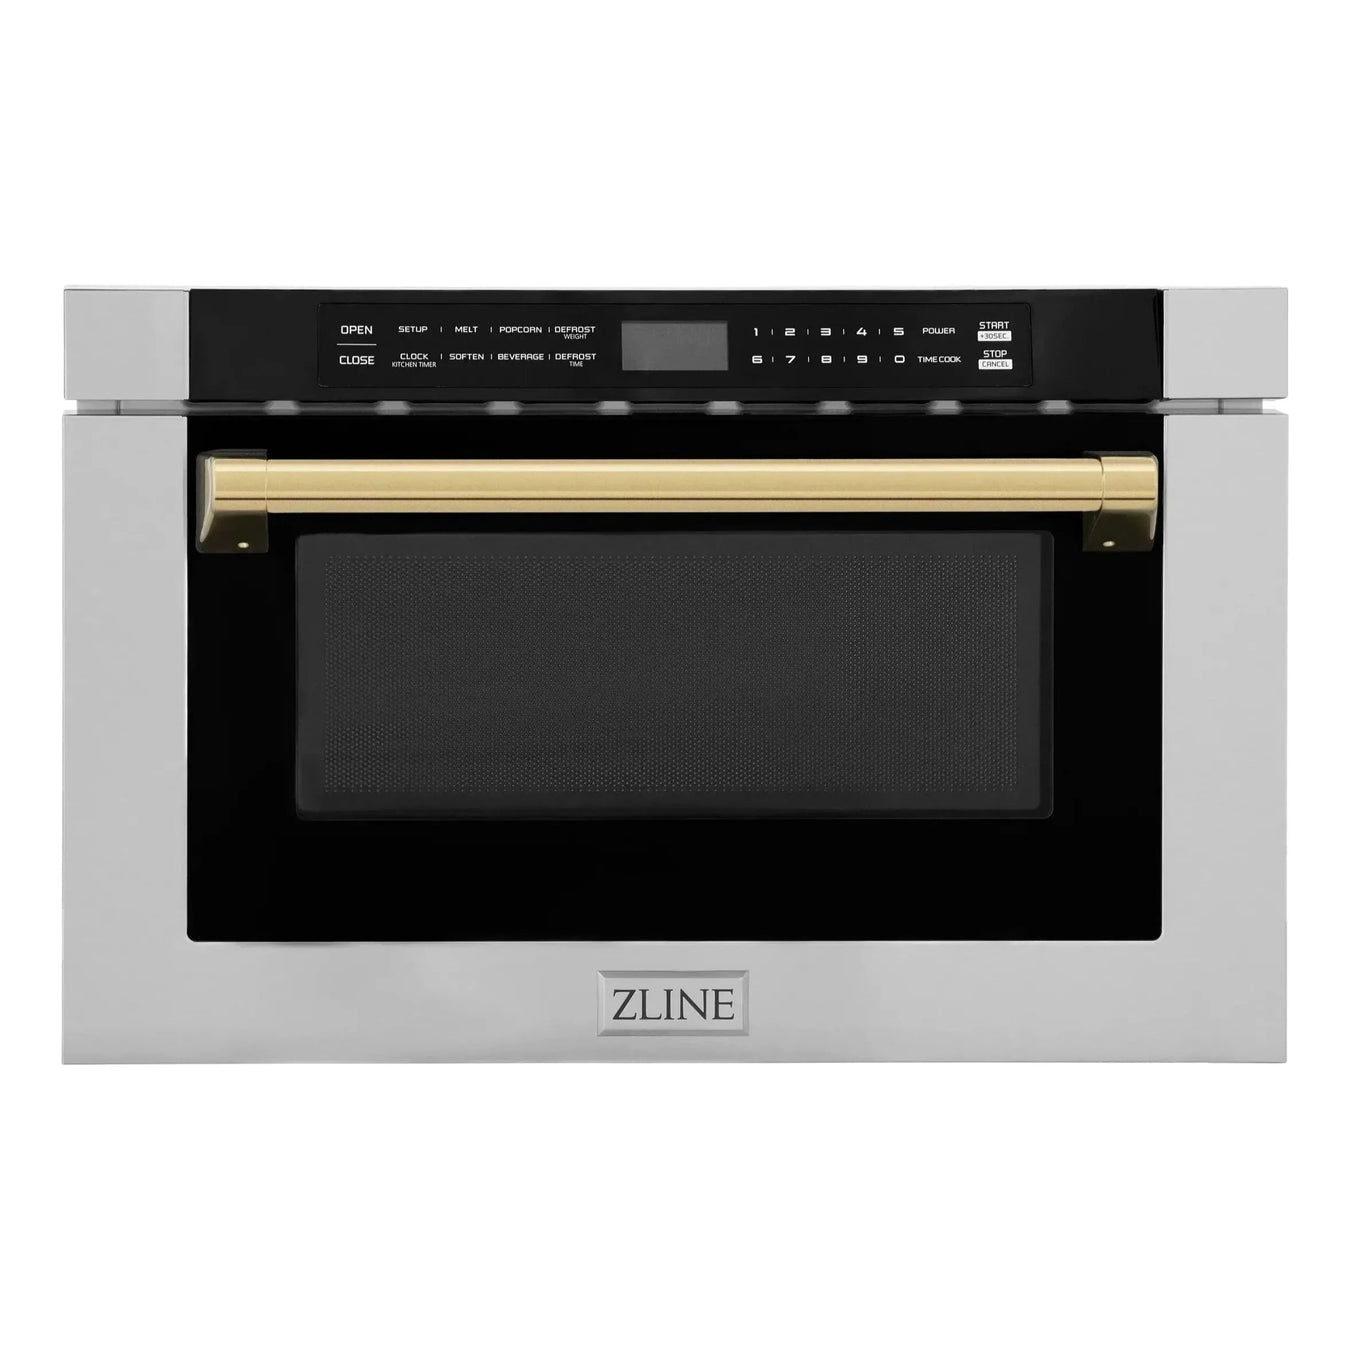 ZLINE Microwaves ZLINE Autograph Edition 24" 1.2 cu. ft. Built-in Microwave Drawer with a Traditional Handle In Stainless Steel and Gold Accents MWDZ-1-H-G